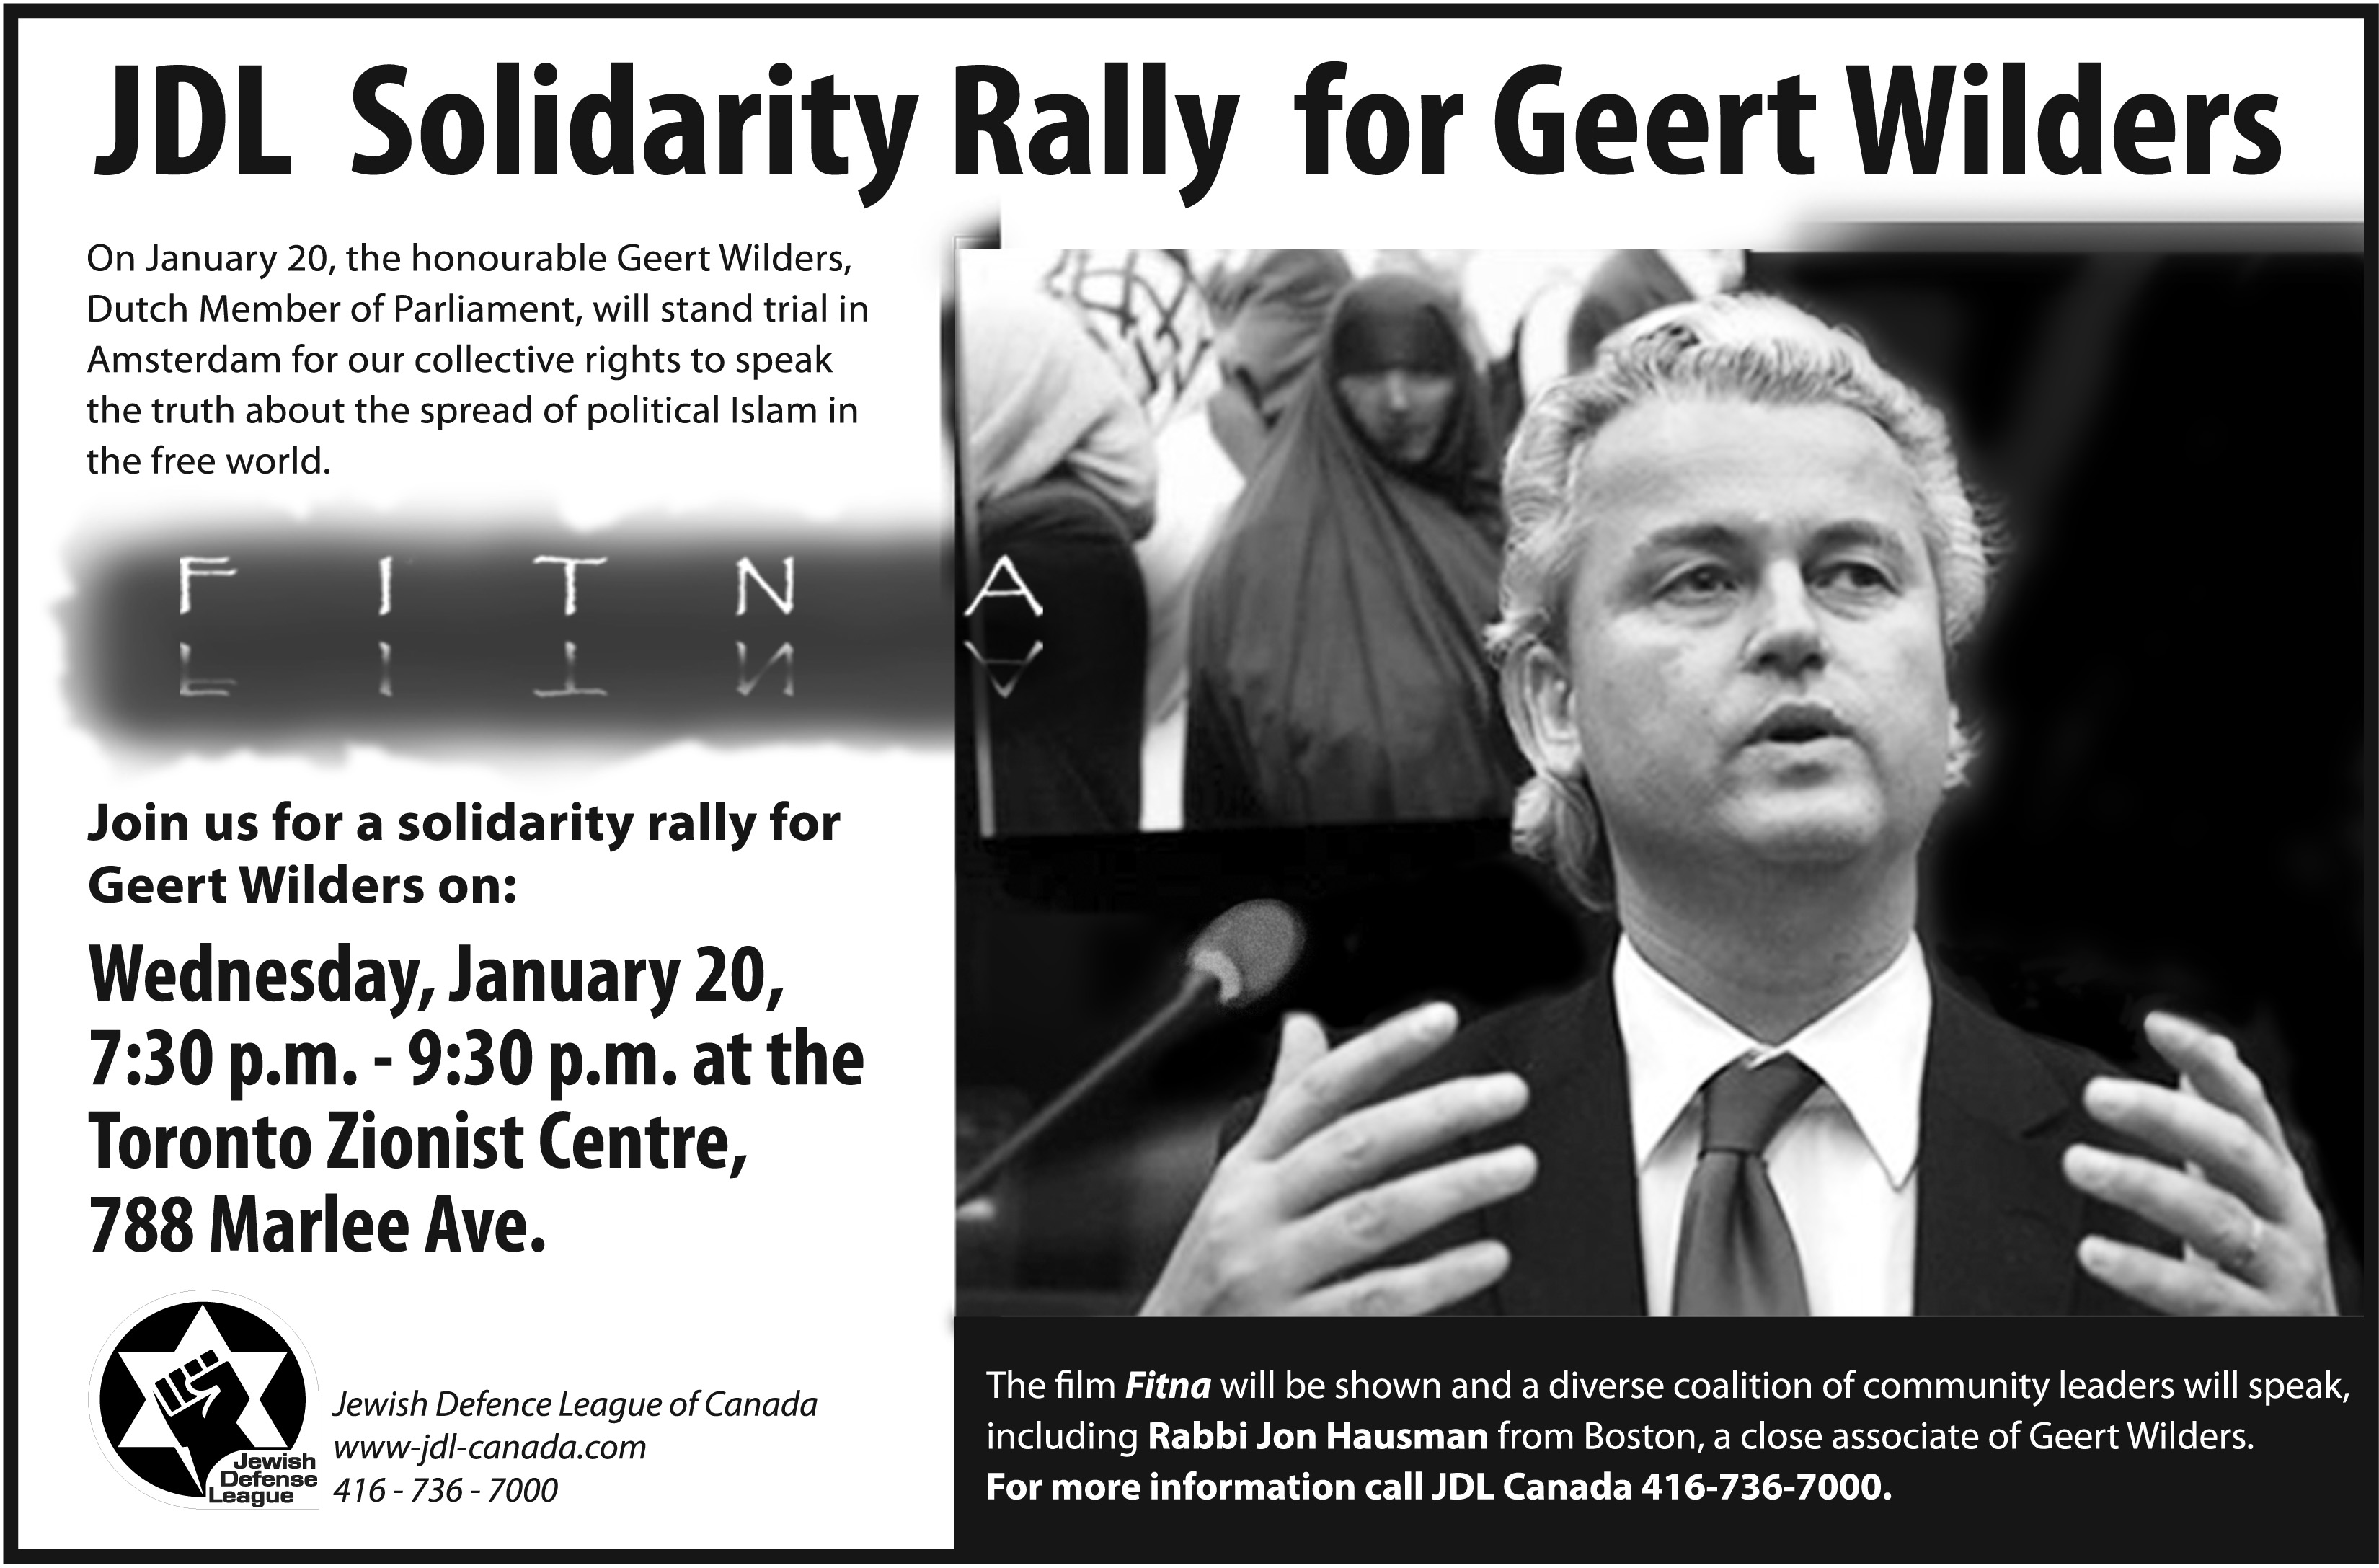 Advertisement for Jewish Defence League of Canada's 'Solidarity Rally for Geert Wilders.' to be held at Toronto Zionist Centre, January 20, 2010.